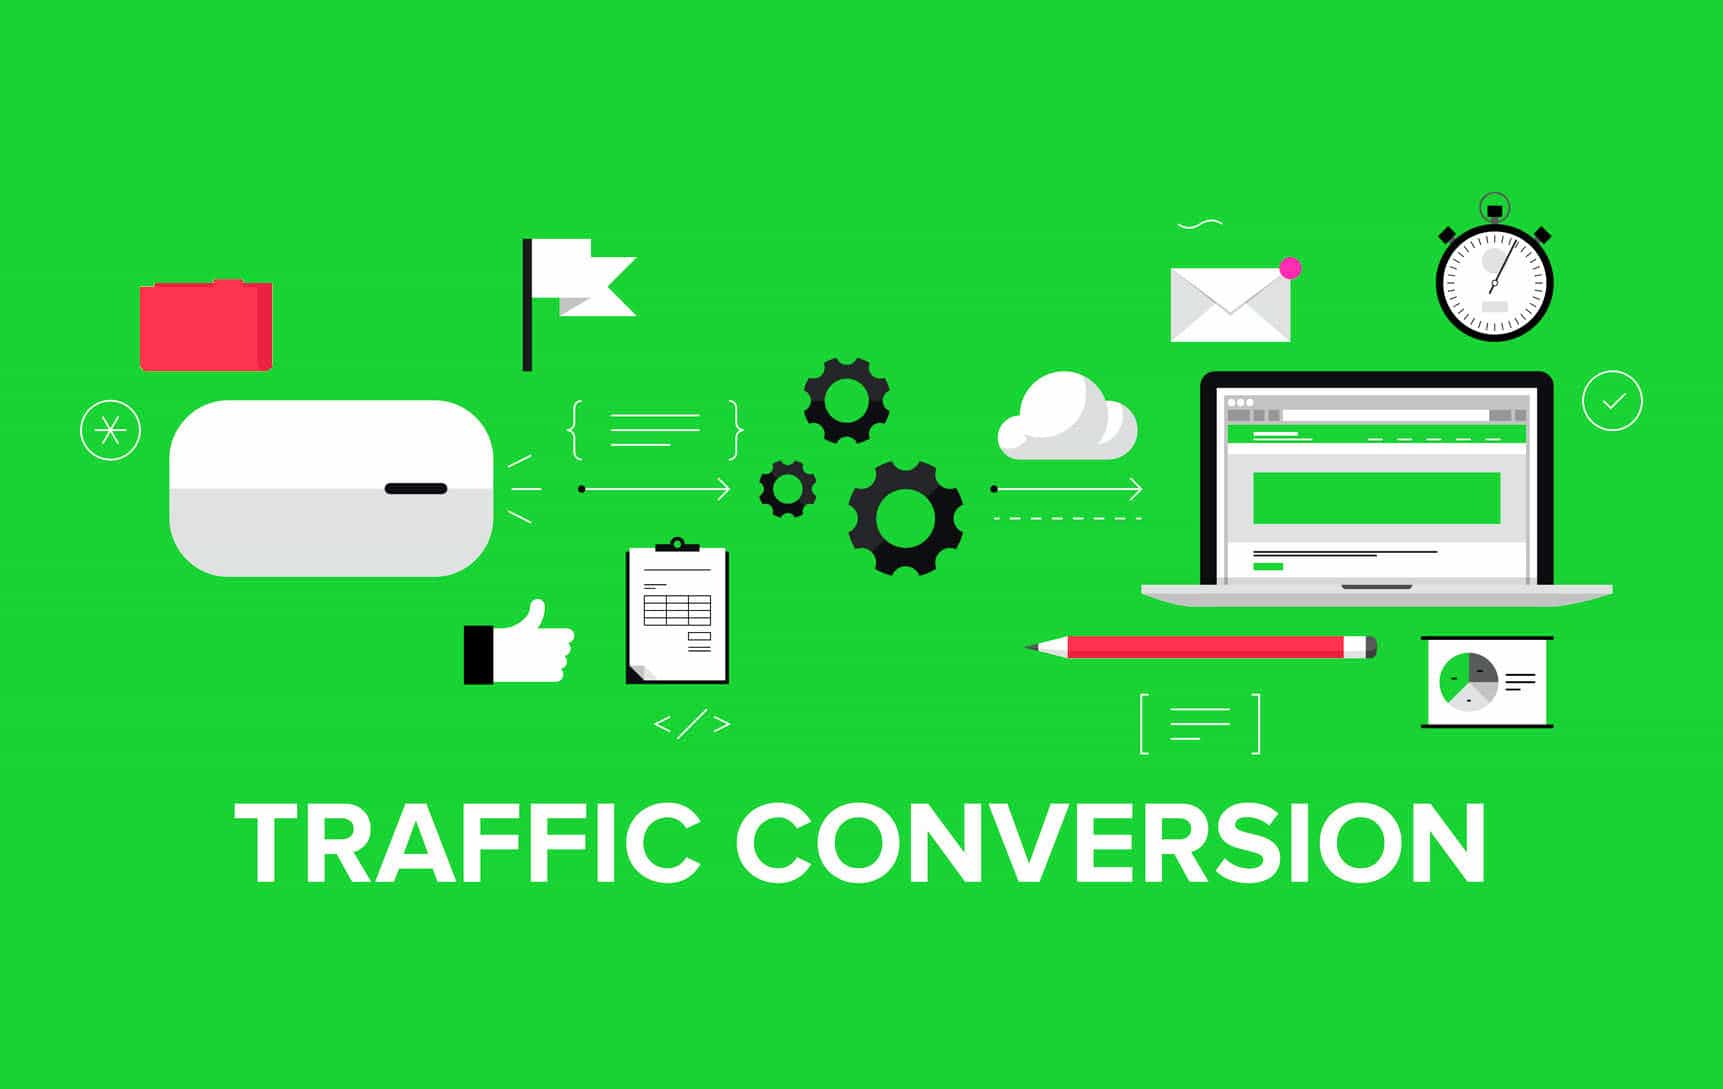 5 Tips to Increase Website Conversions